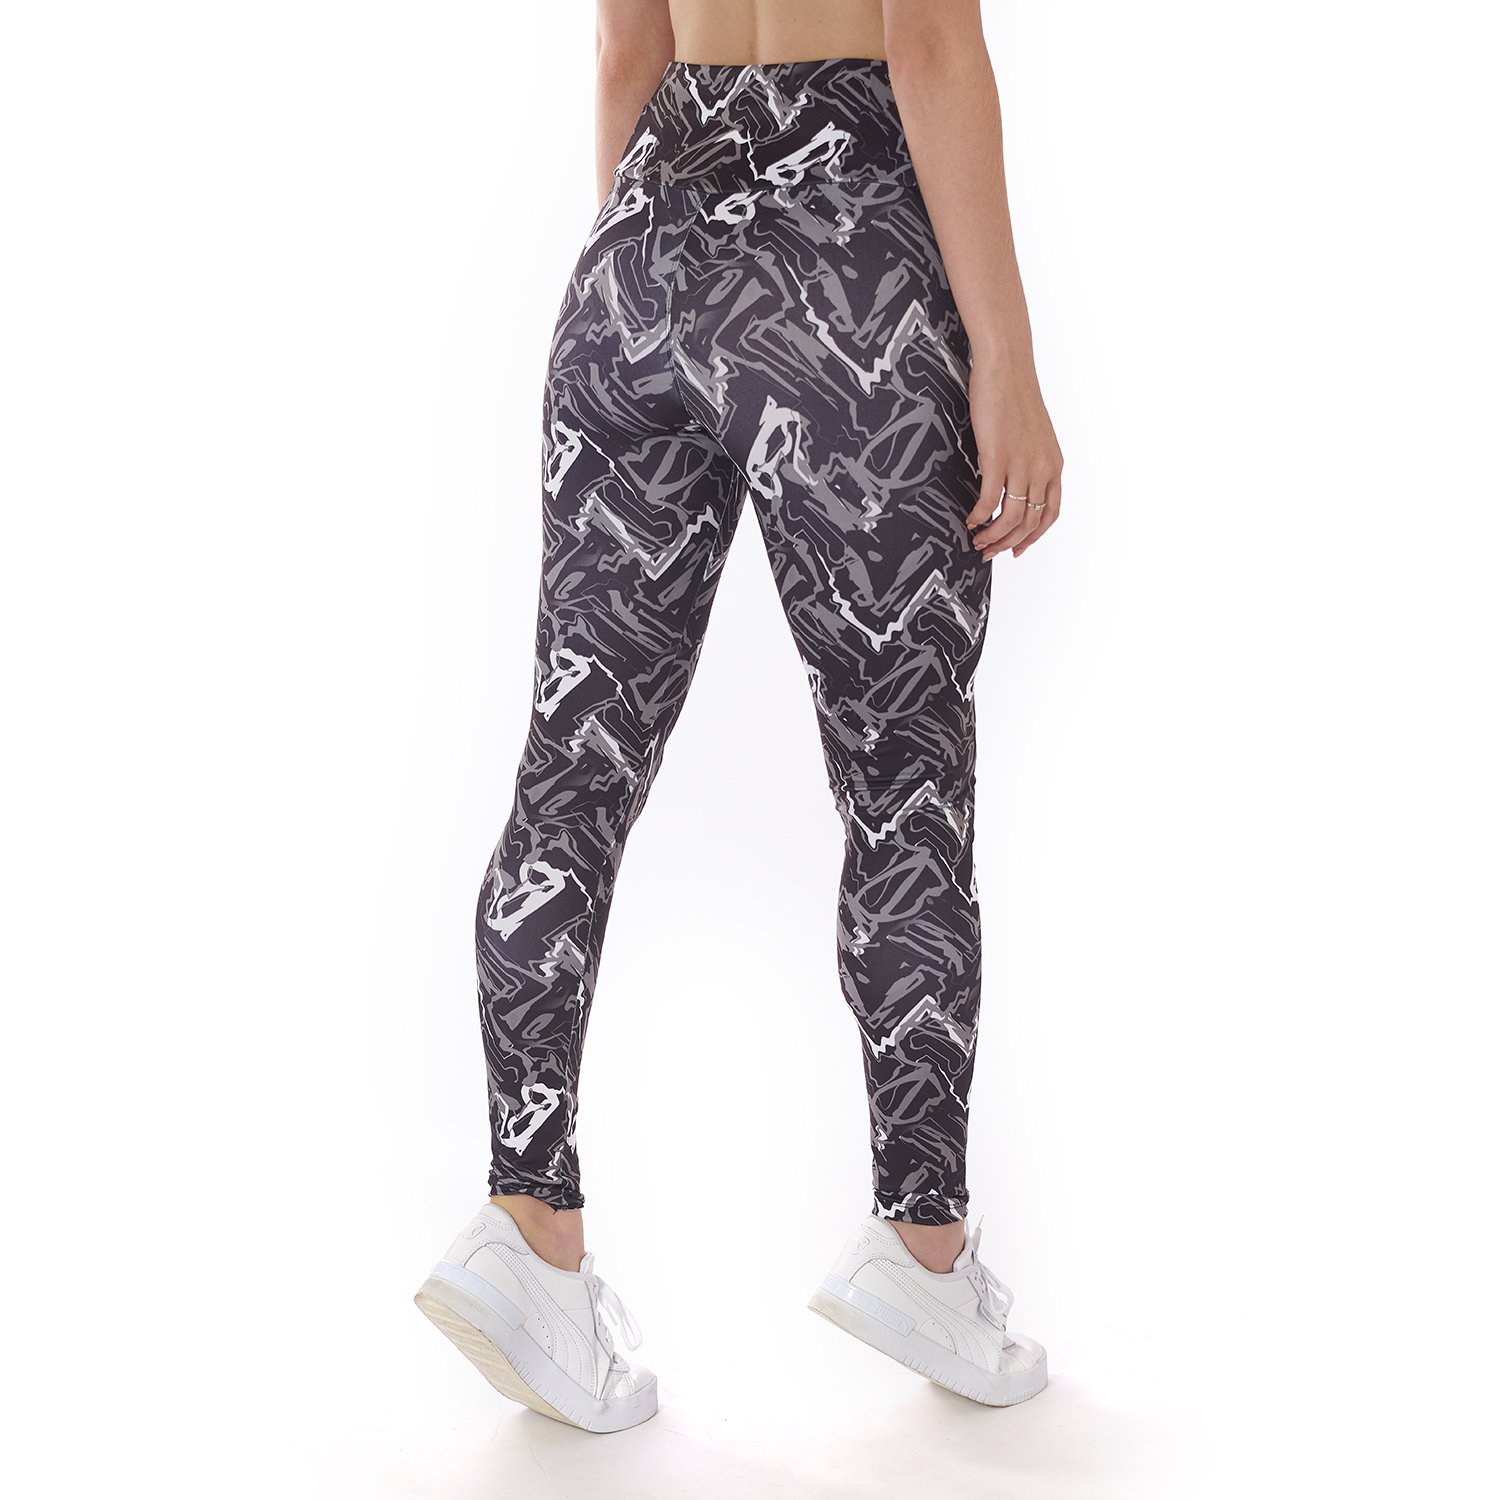 Calza: Flowing Move Tights 